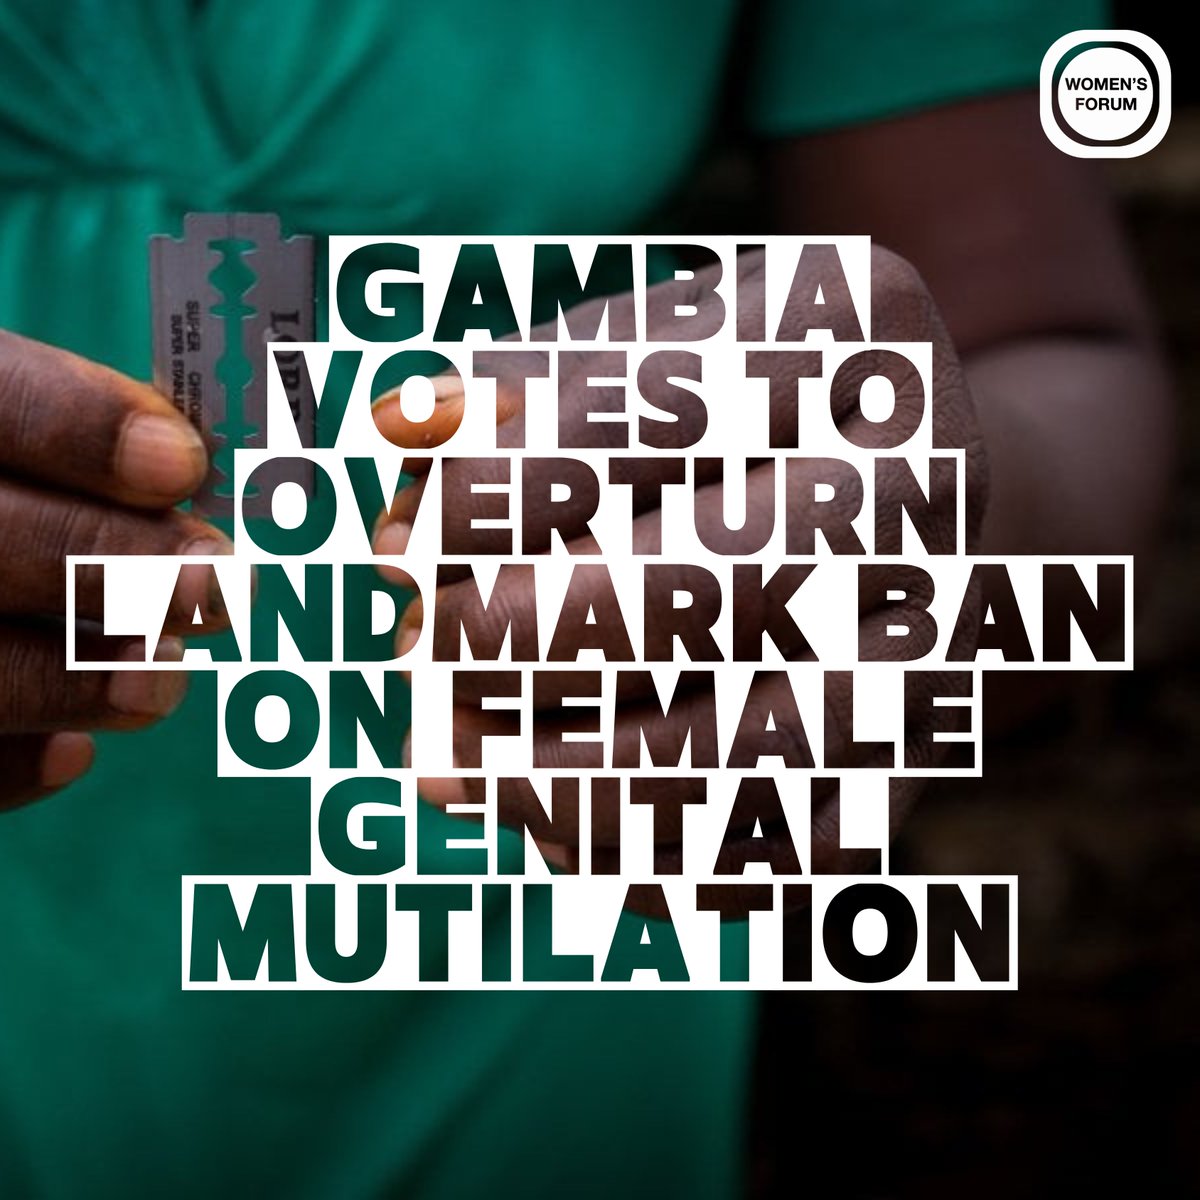 Gambian lawmakers are voting to revoke ban on female genital mutilation. Overturning this ban undermines decades of work to #EndFGM. If passed, #Gambia will be the first nation to roll back protections against #FGM. The Women's Forum vehemently oppose this decision! #StopFGM